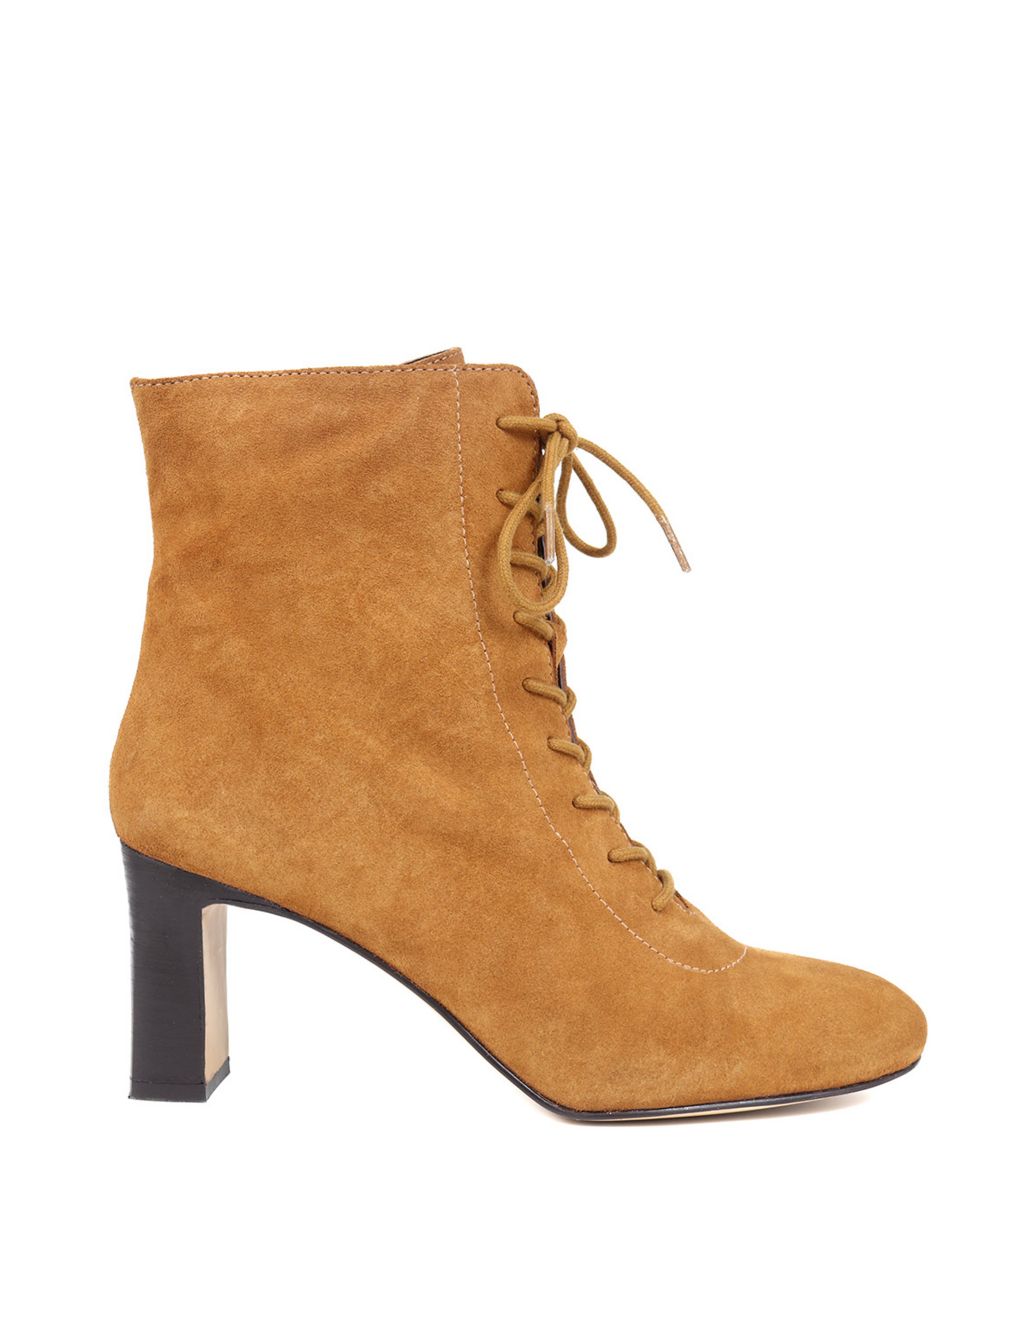 Suede Lace Up Block Heel Ankle Boots